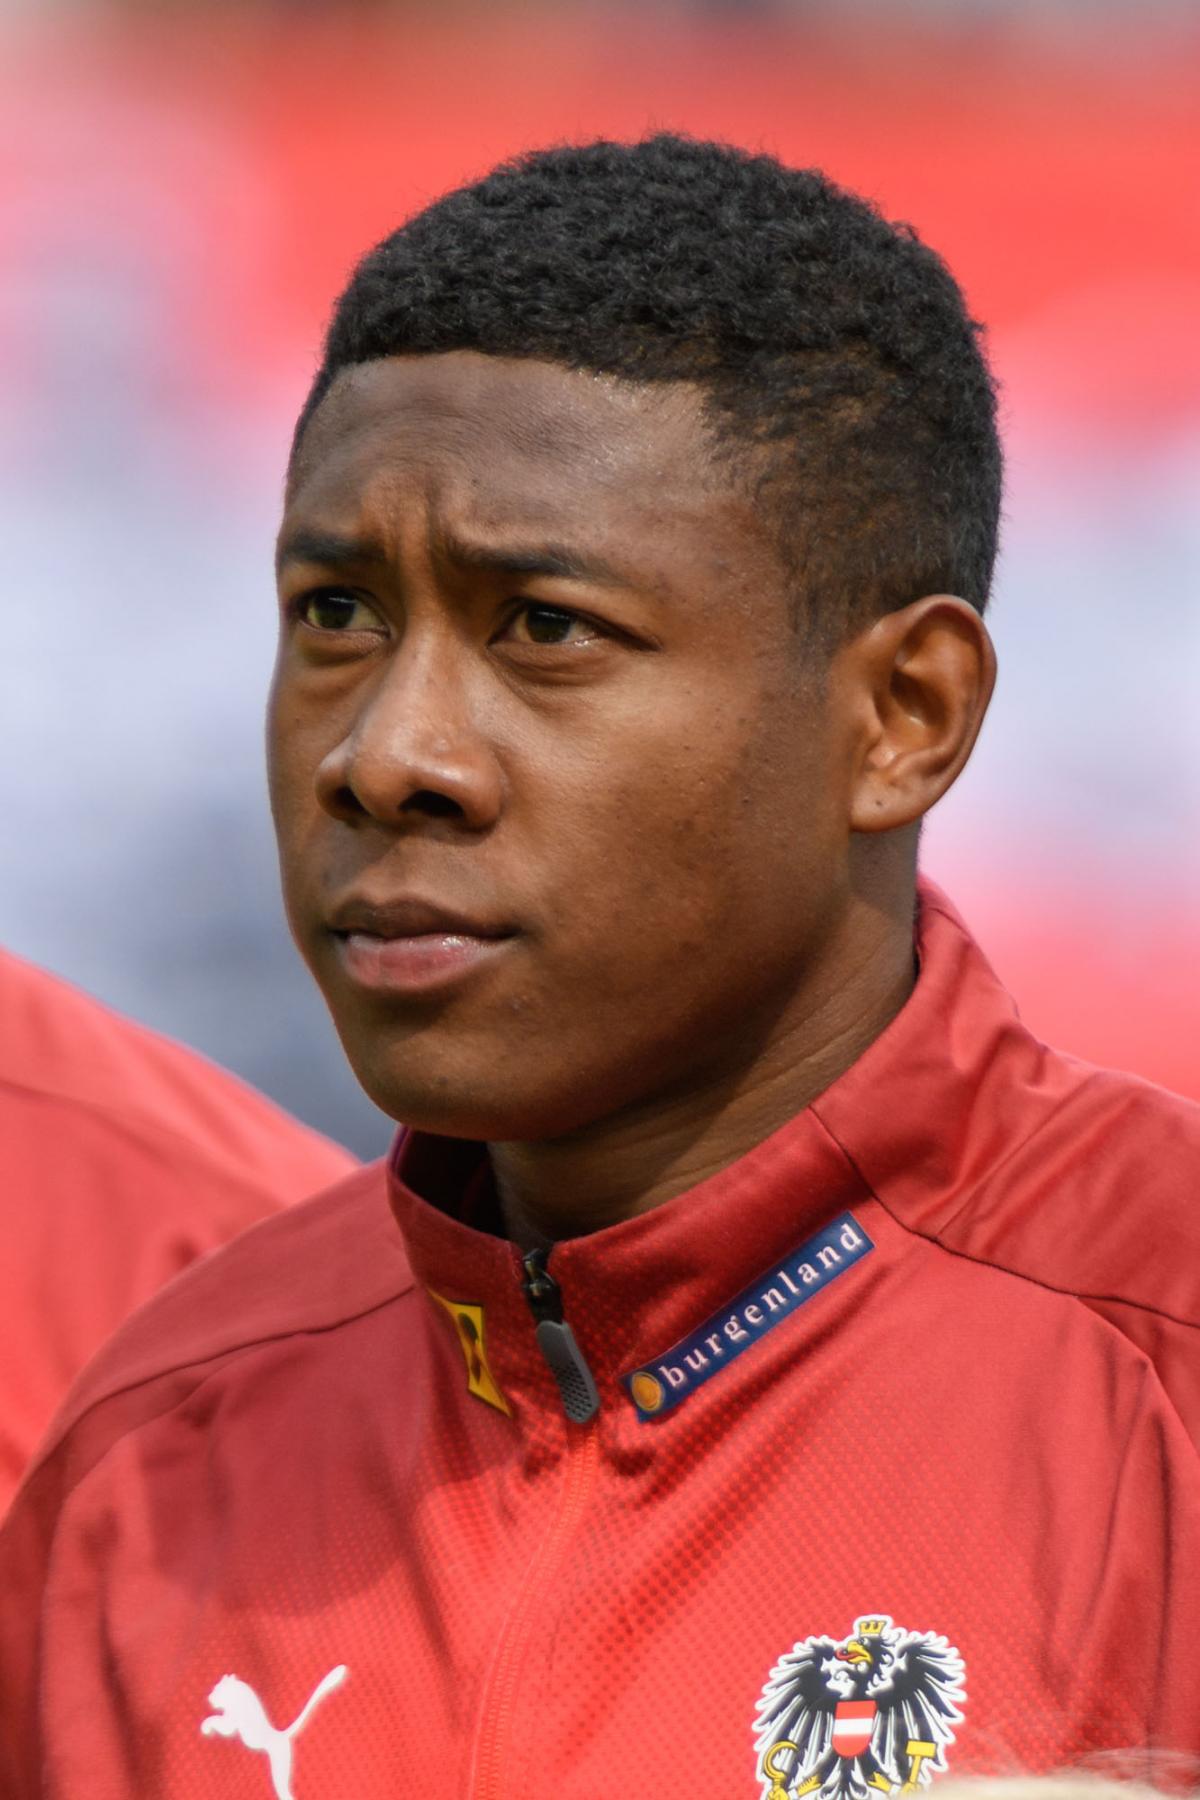 David Alaba - Celebrity biography, zodiac sign and famous quotes